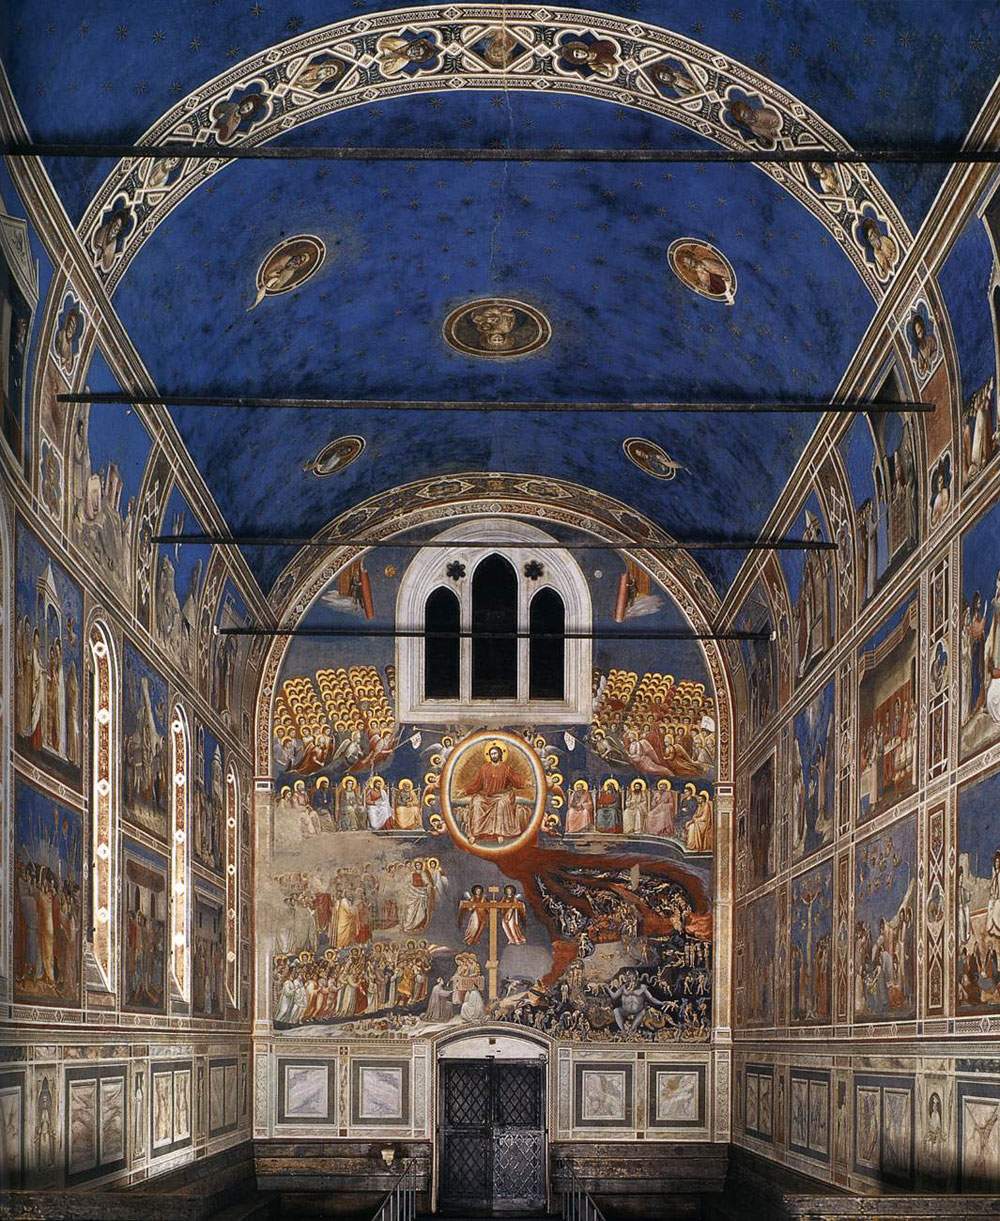 New lighting system for the Scrovegni Chapel